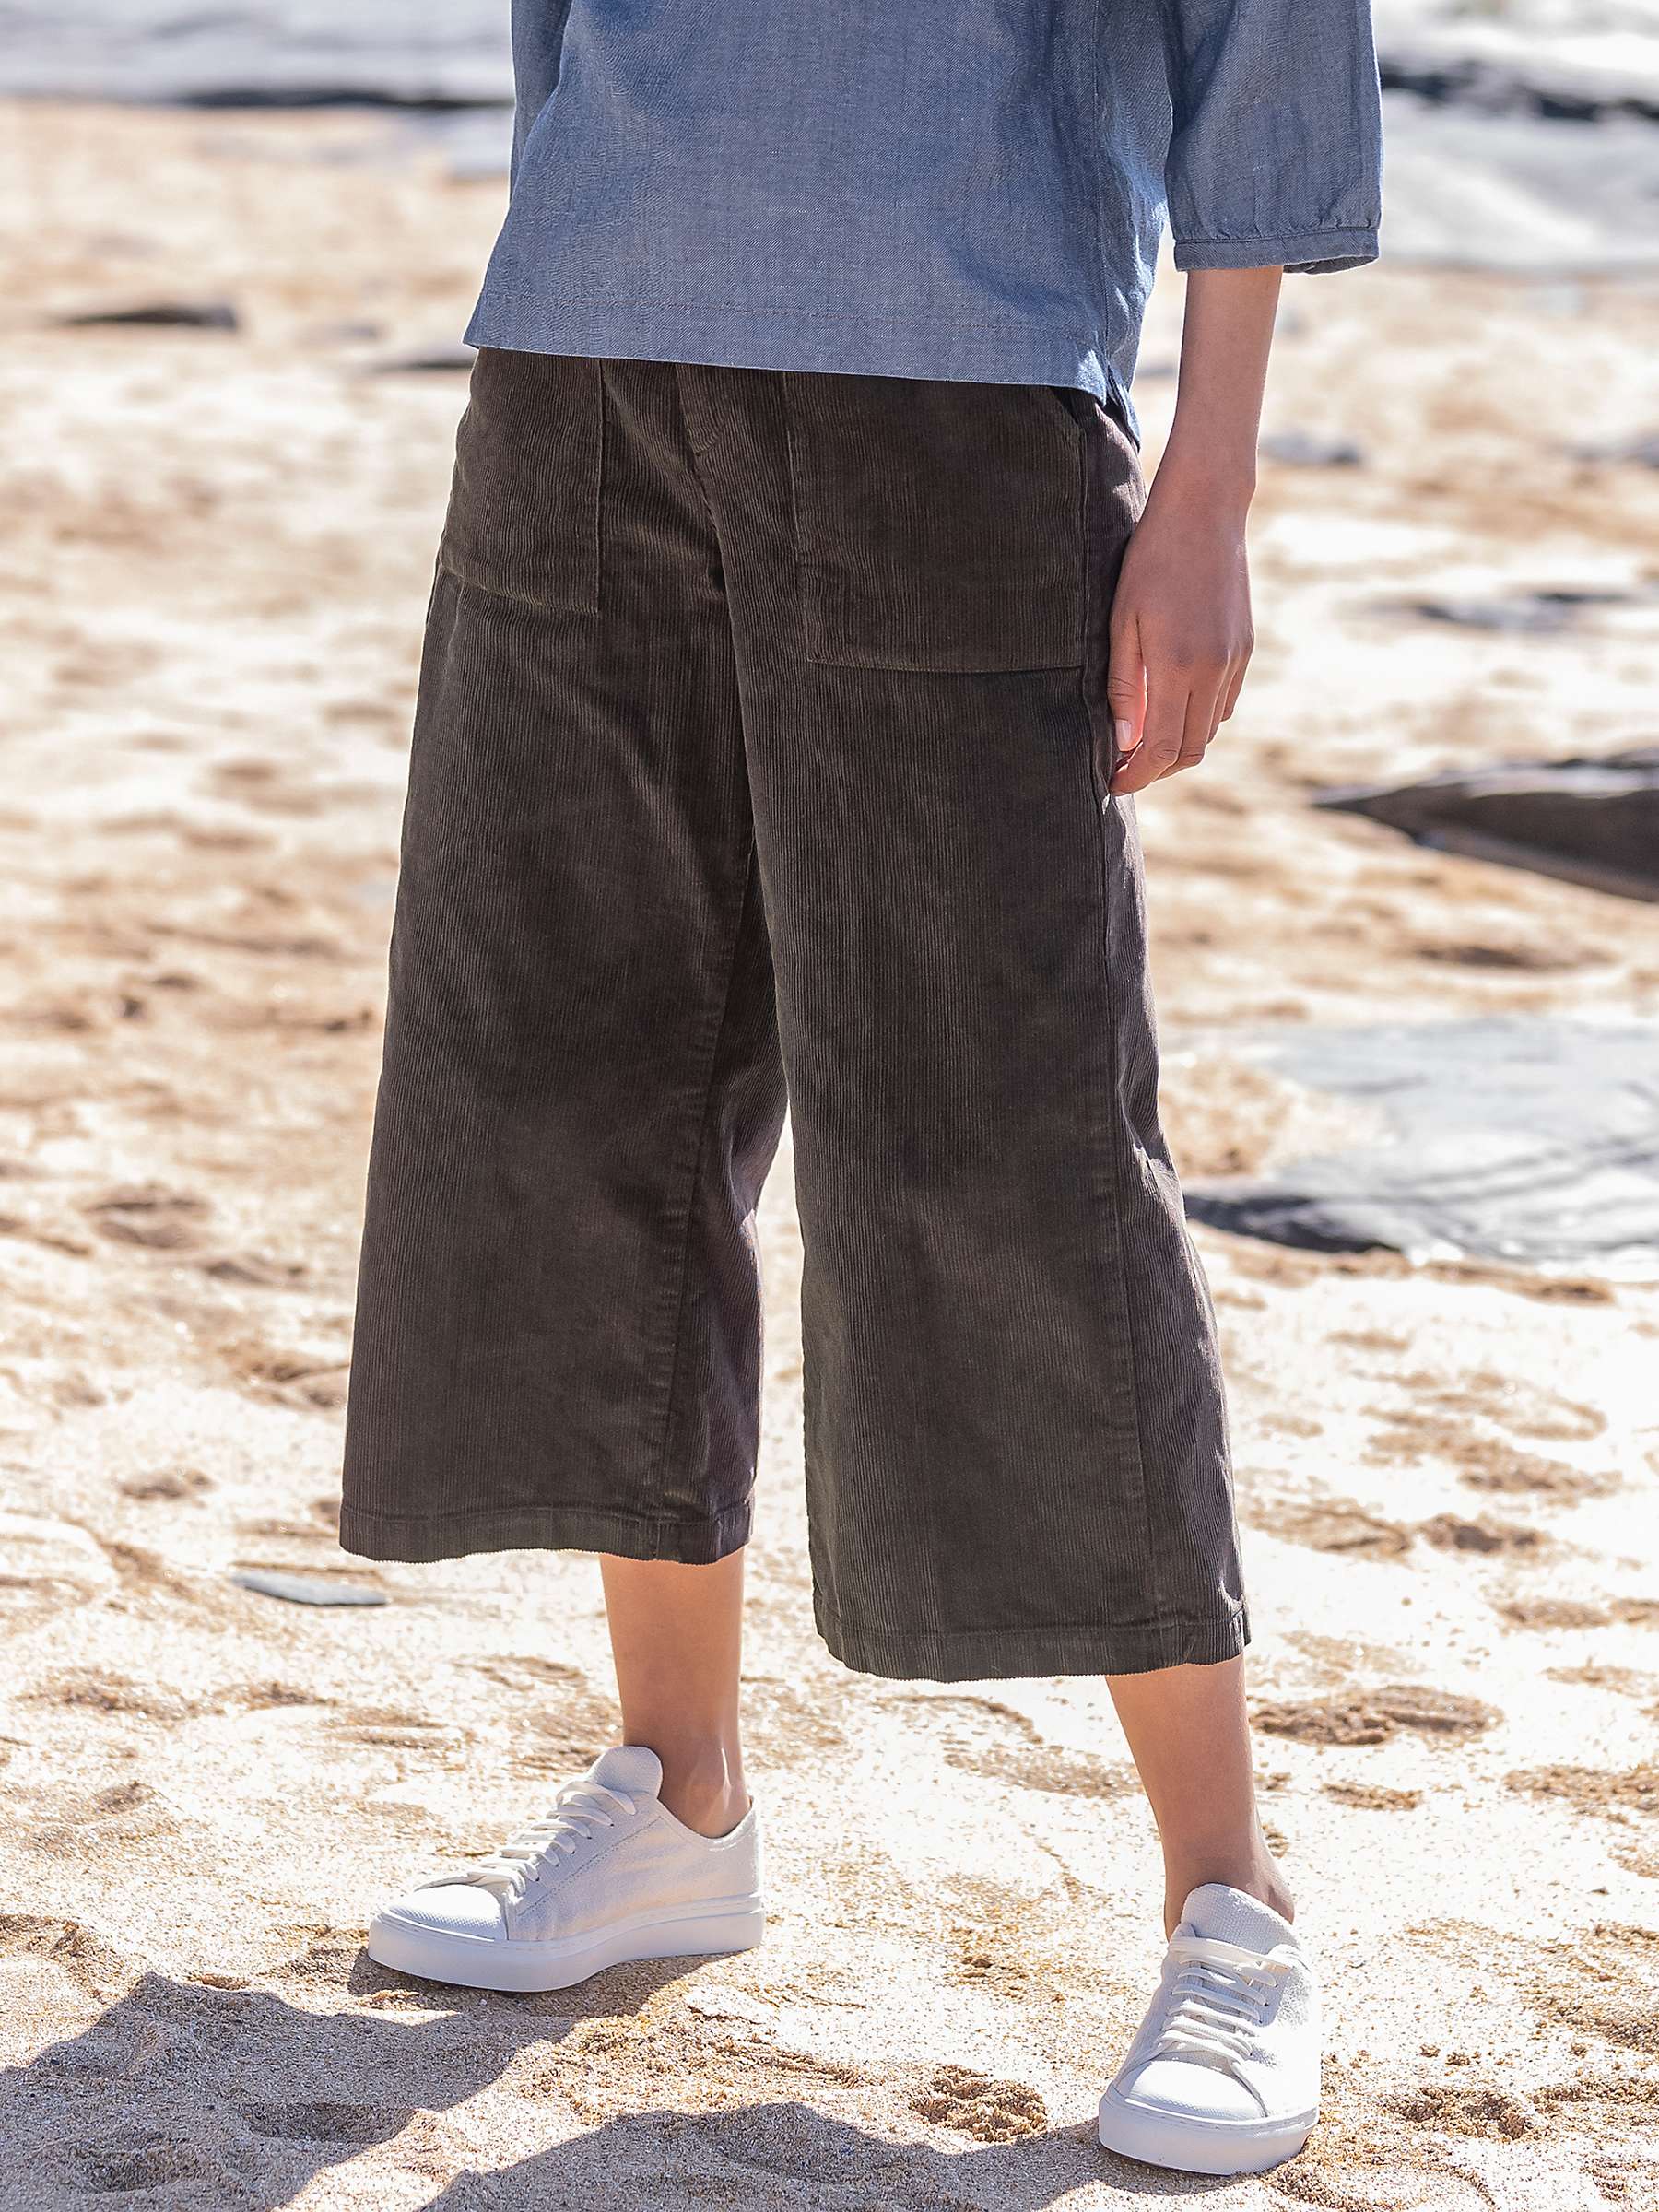 Buy Celtic & Co. Organic Cotton Cord Wide Crop Trousers, Ebony Online at johnlewis.com